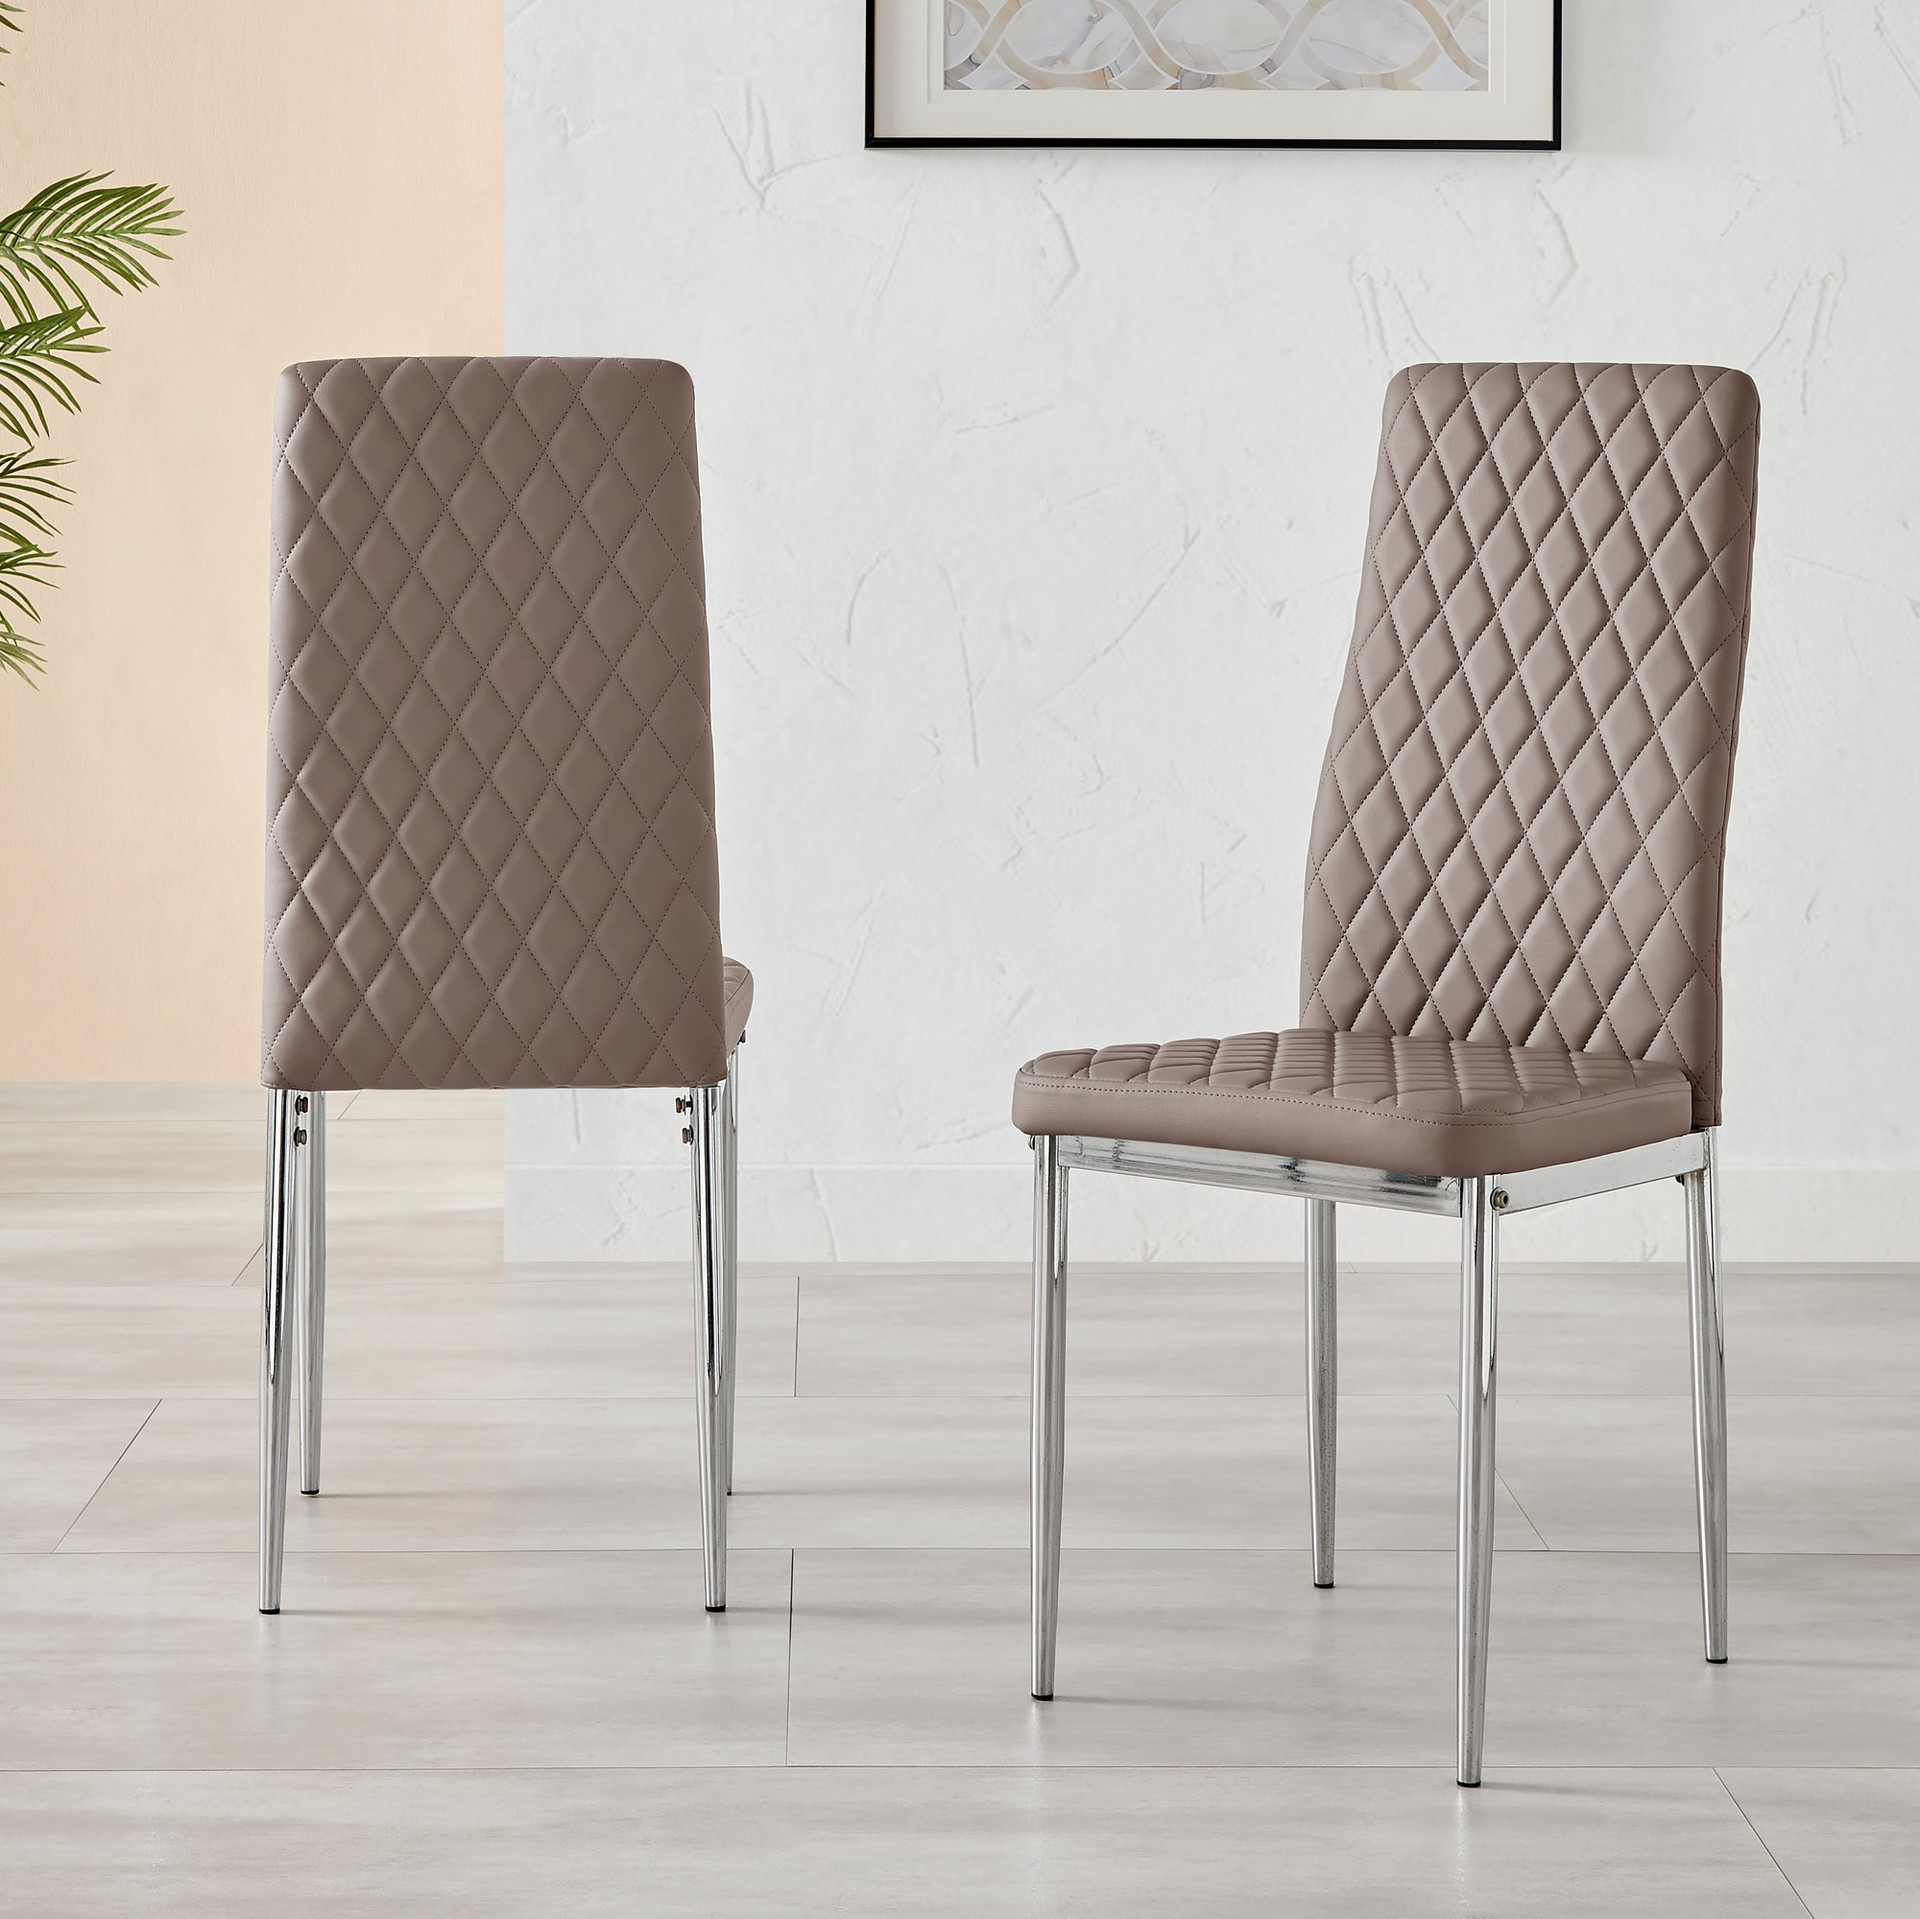 Grey Hatched Faux Leather Dining Chairs | Furniturebox